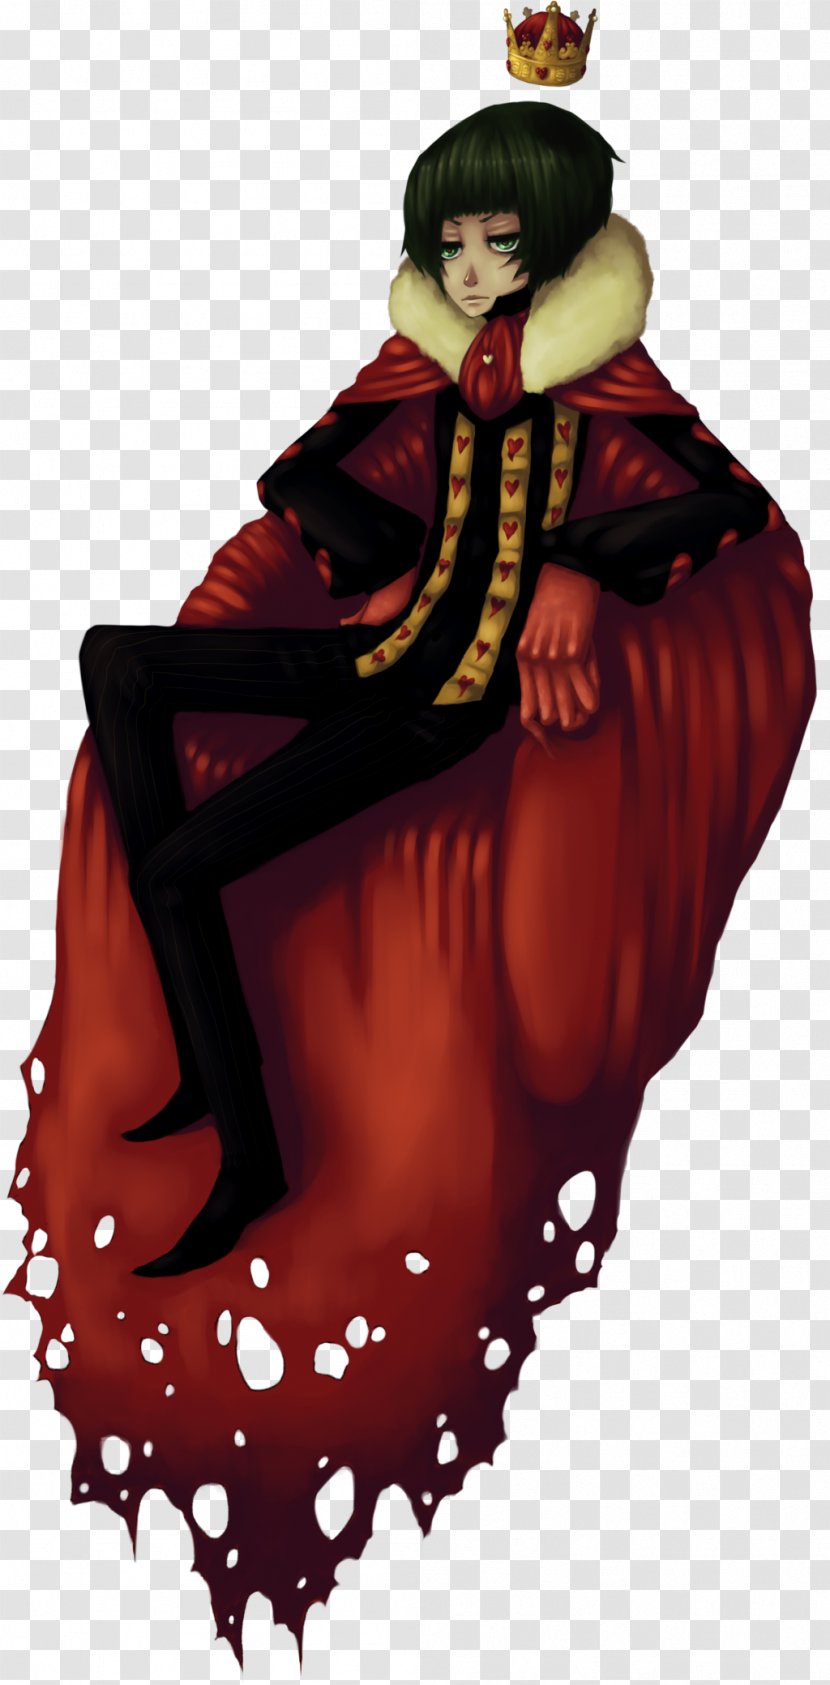 Queen Of Hearts Alice: Madness Returns Red King Alice's Adventures In Wonderland - Alice Transparent PNG